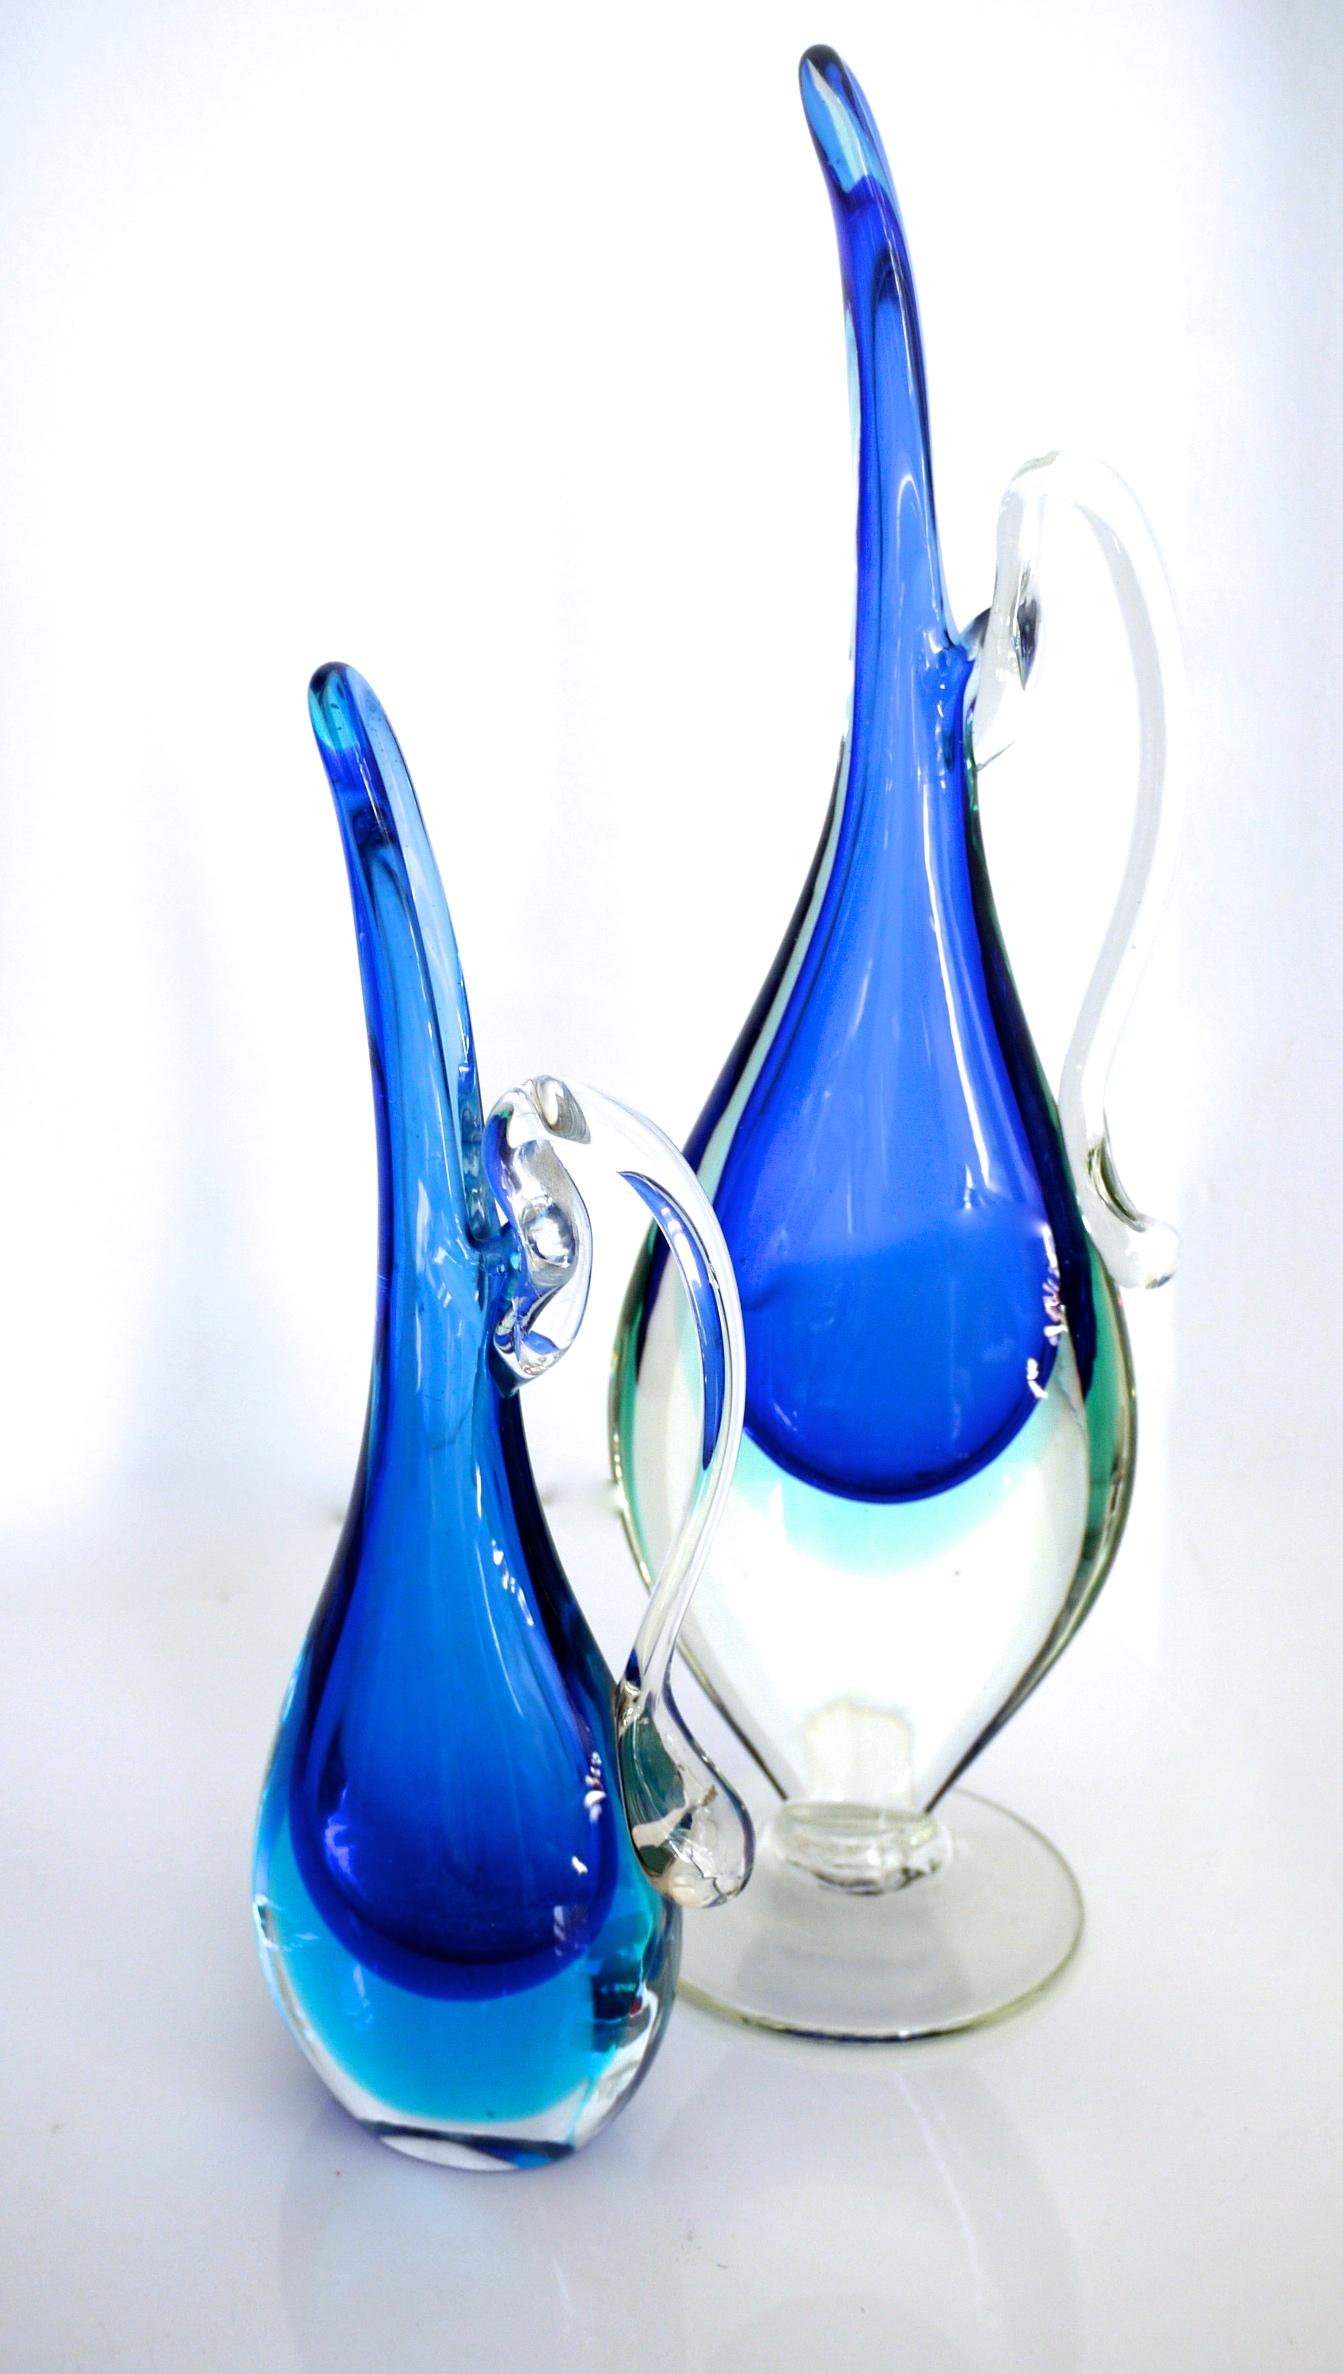 Pair of Murano Sommerso Glass Vases/Pitchers in Layered Shades of Blue, 1980s For Sale 3